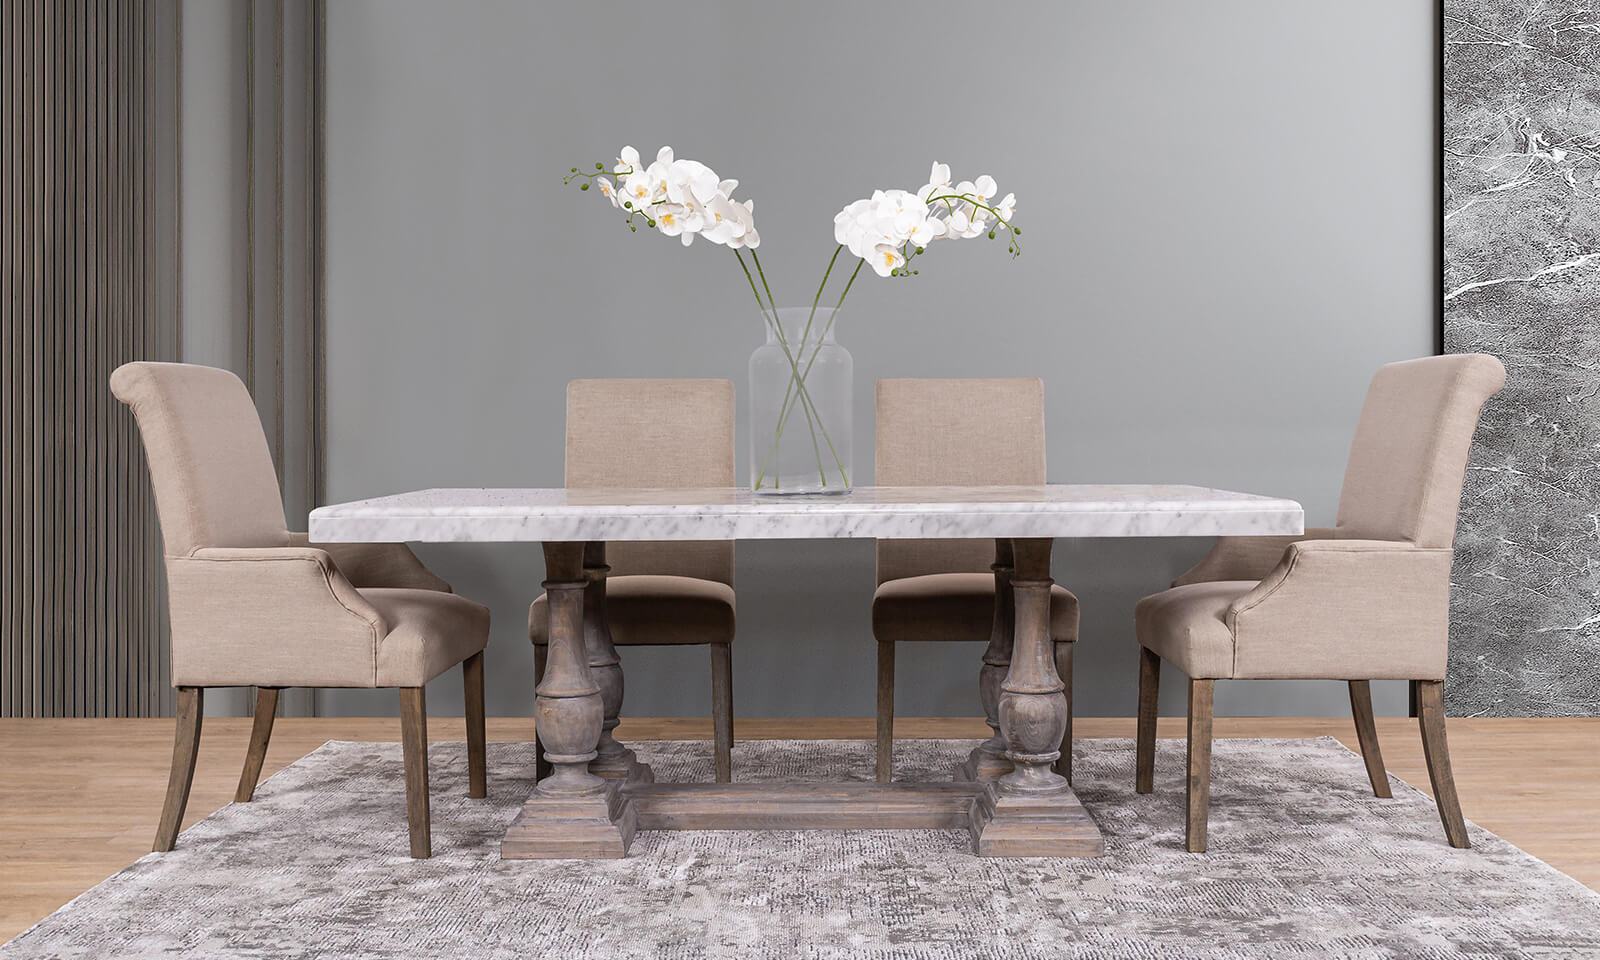 WHAT IS THE BEST DINING TABLE TOP